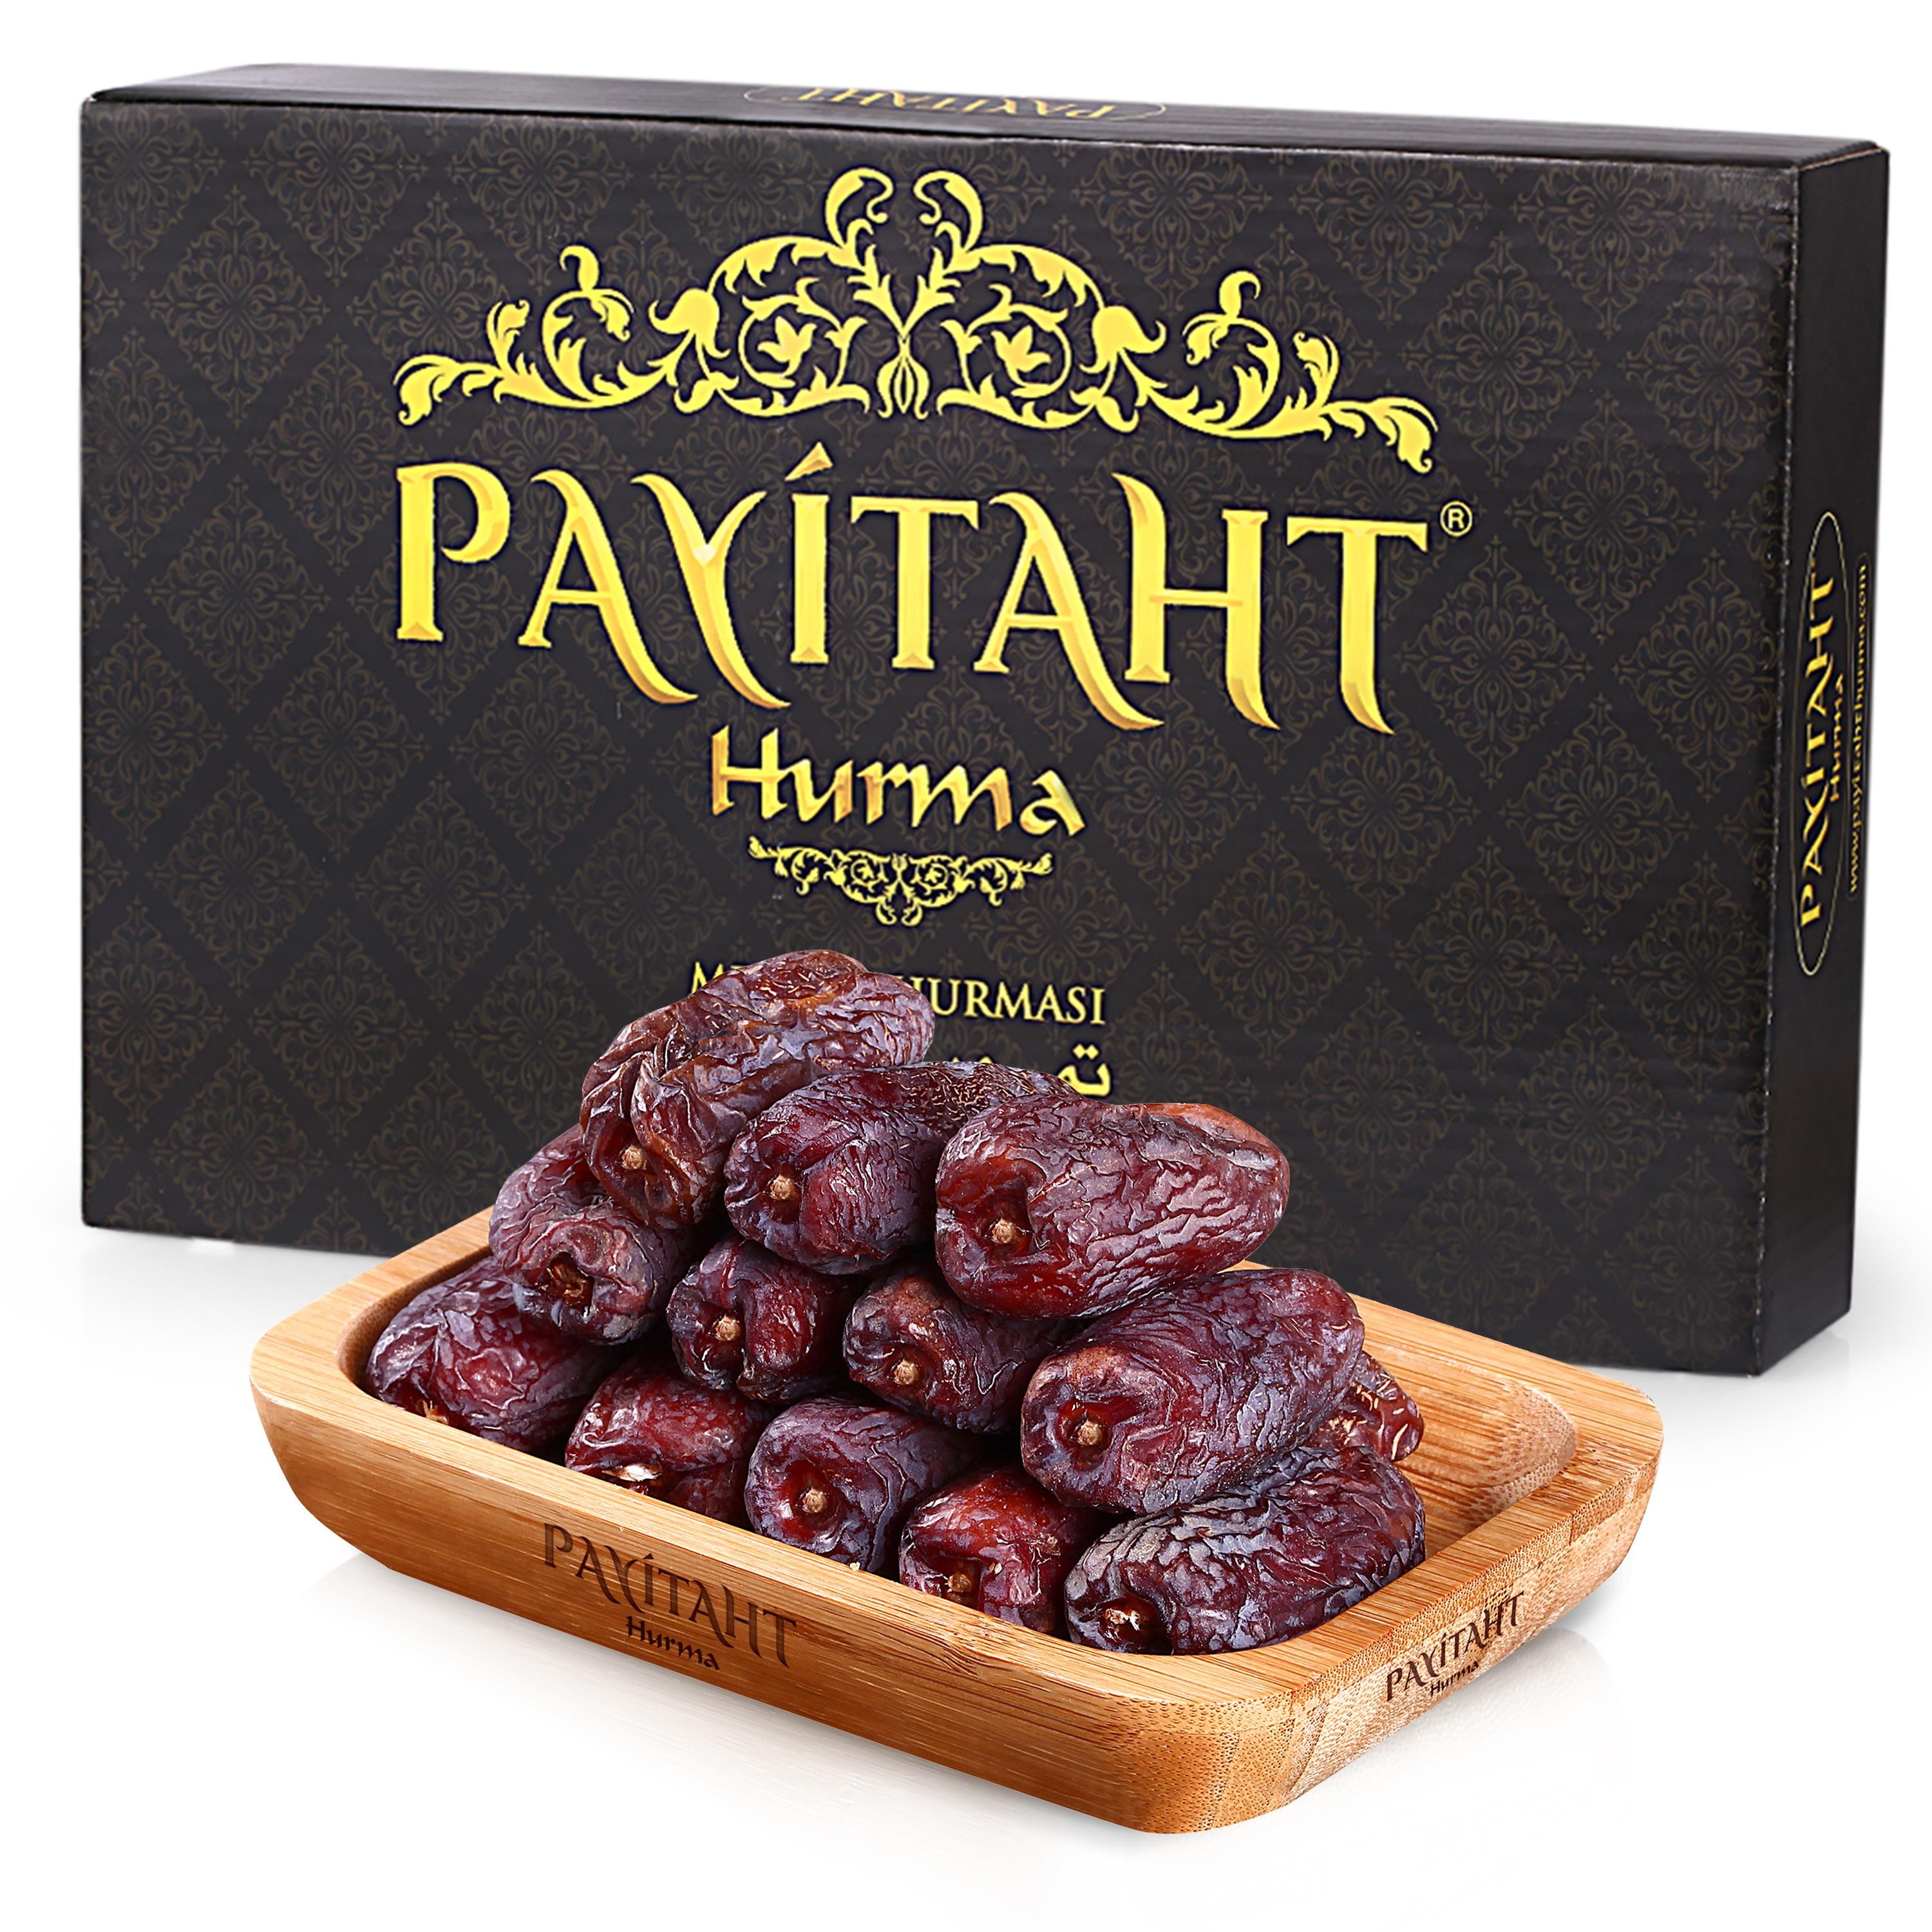 Payitaht Hurma Medine Amber Double Dates 5 KG